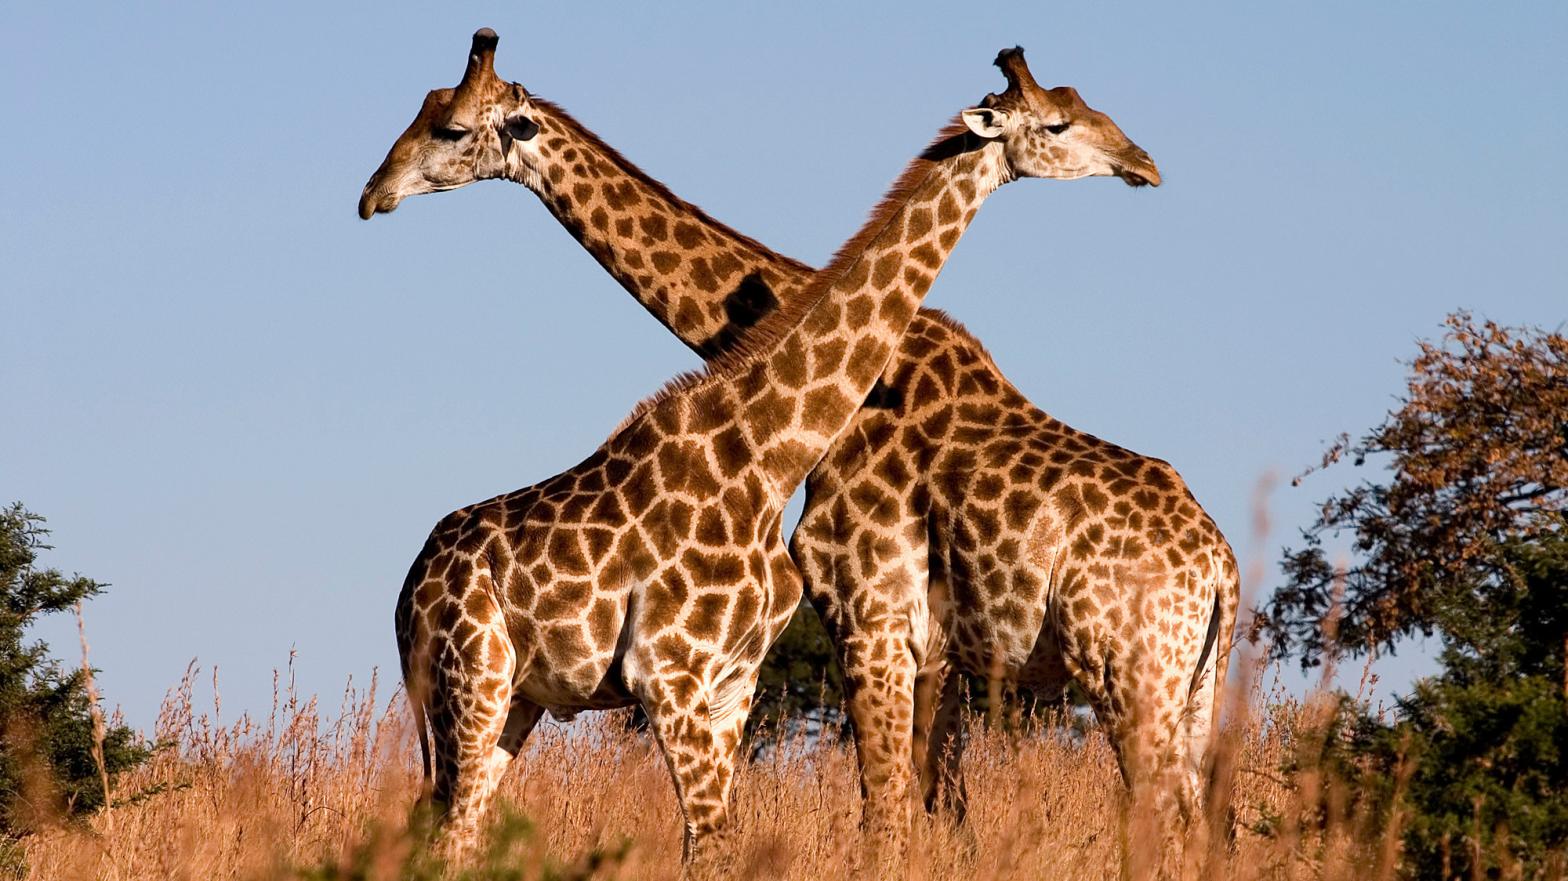 A pair of giraffes in South Africa (not the two who were recently killed by lightning).  (Image: Luca Galuzzi/Wikimedia Commons)